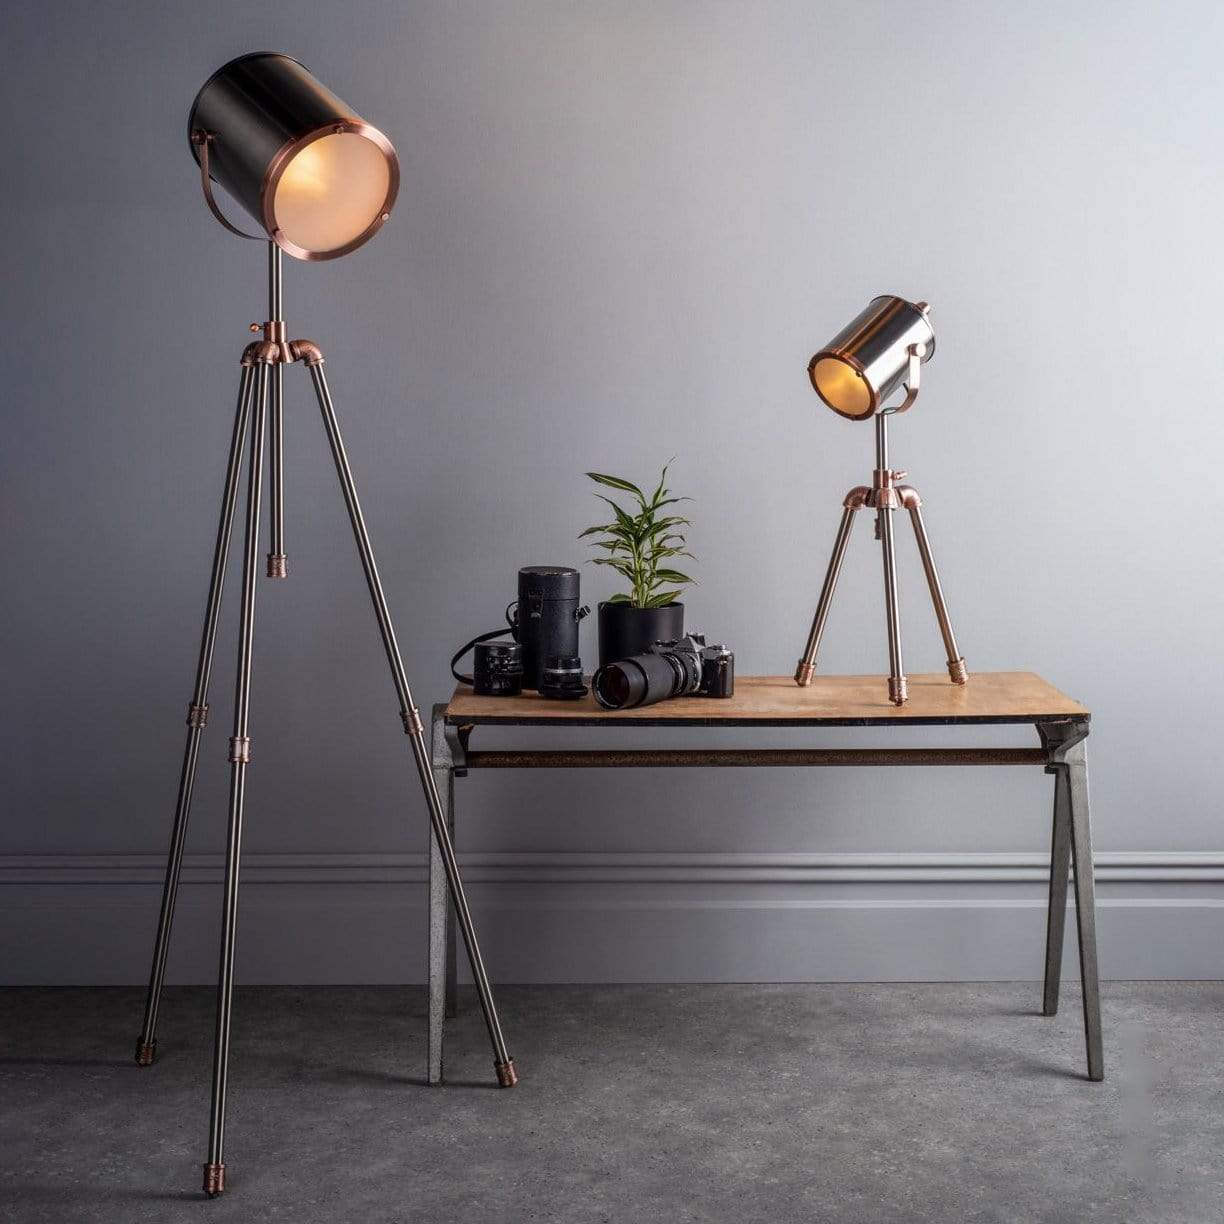 Lights  -  Jake Antique Copper & Silver Table Lamp  -  60001636